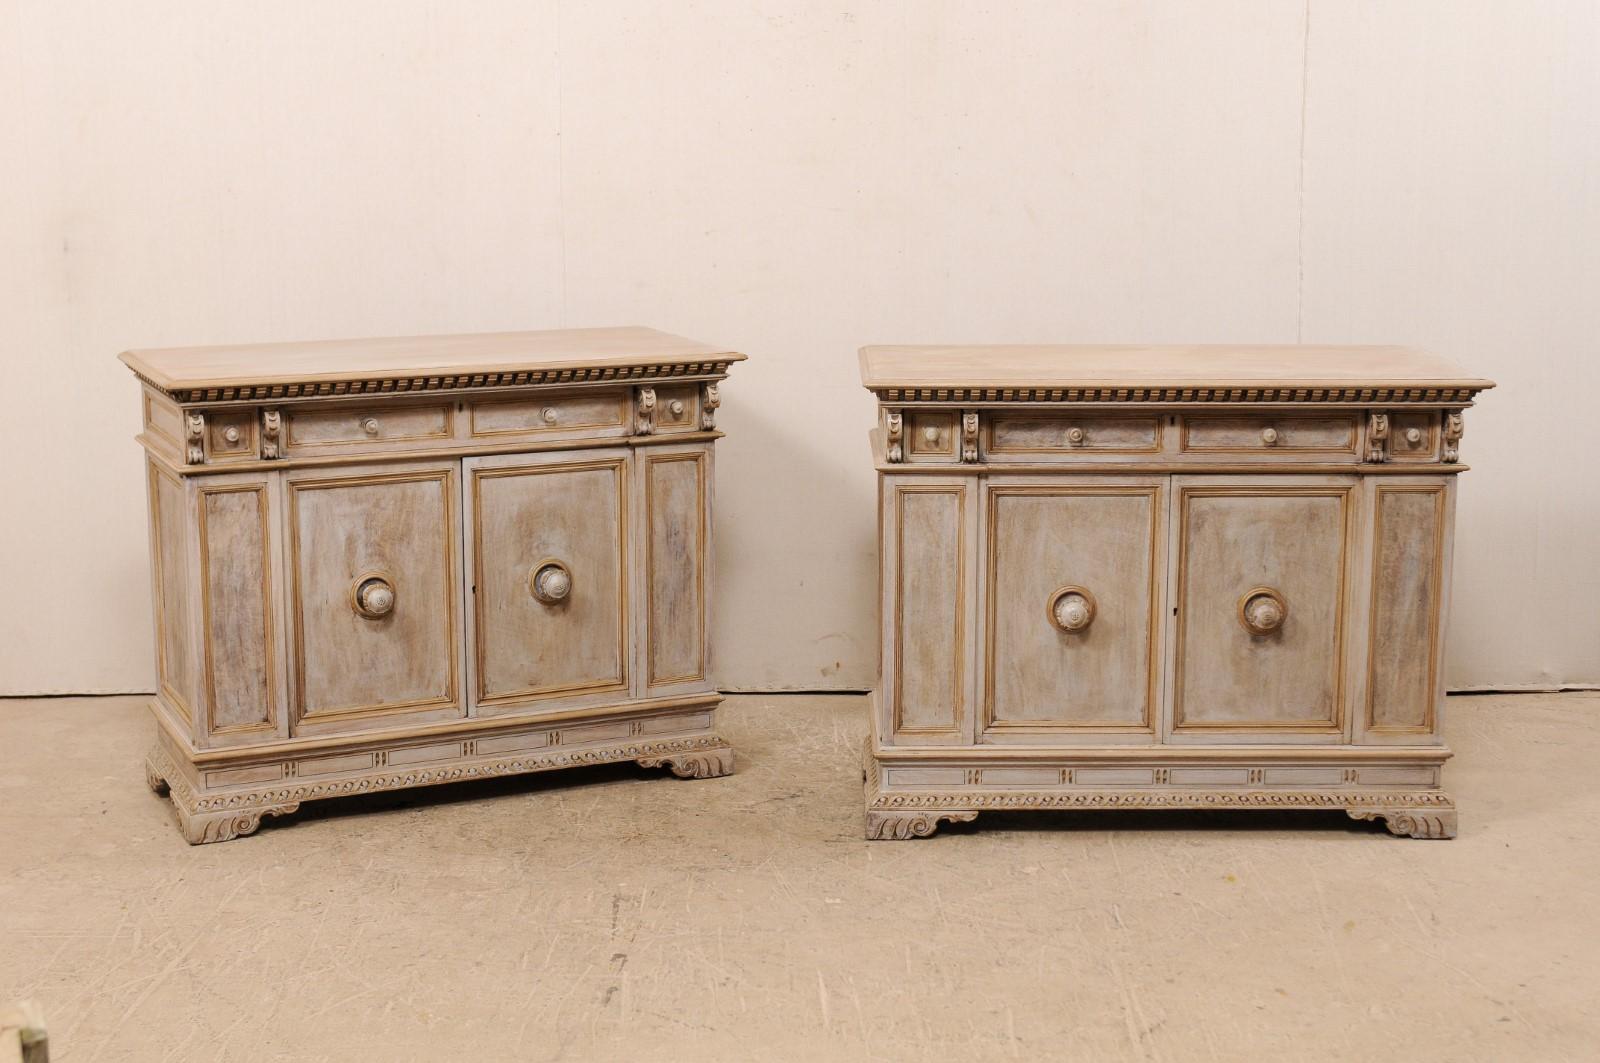 A pair early 20th century, nicely detailed Italian inspired, American made cabinets by furniture makers Henry Fuldner & Sons, NY. This pair of antique Italian style buffet cabinets each feature rectangular-shaped tops with a carved dentil molded